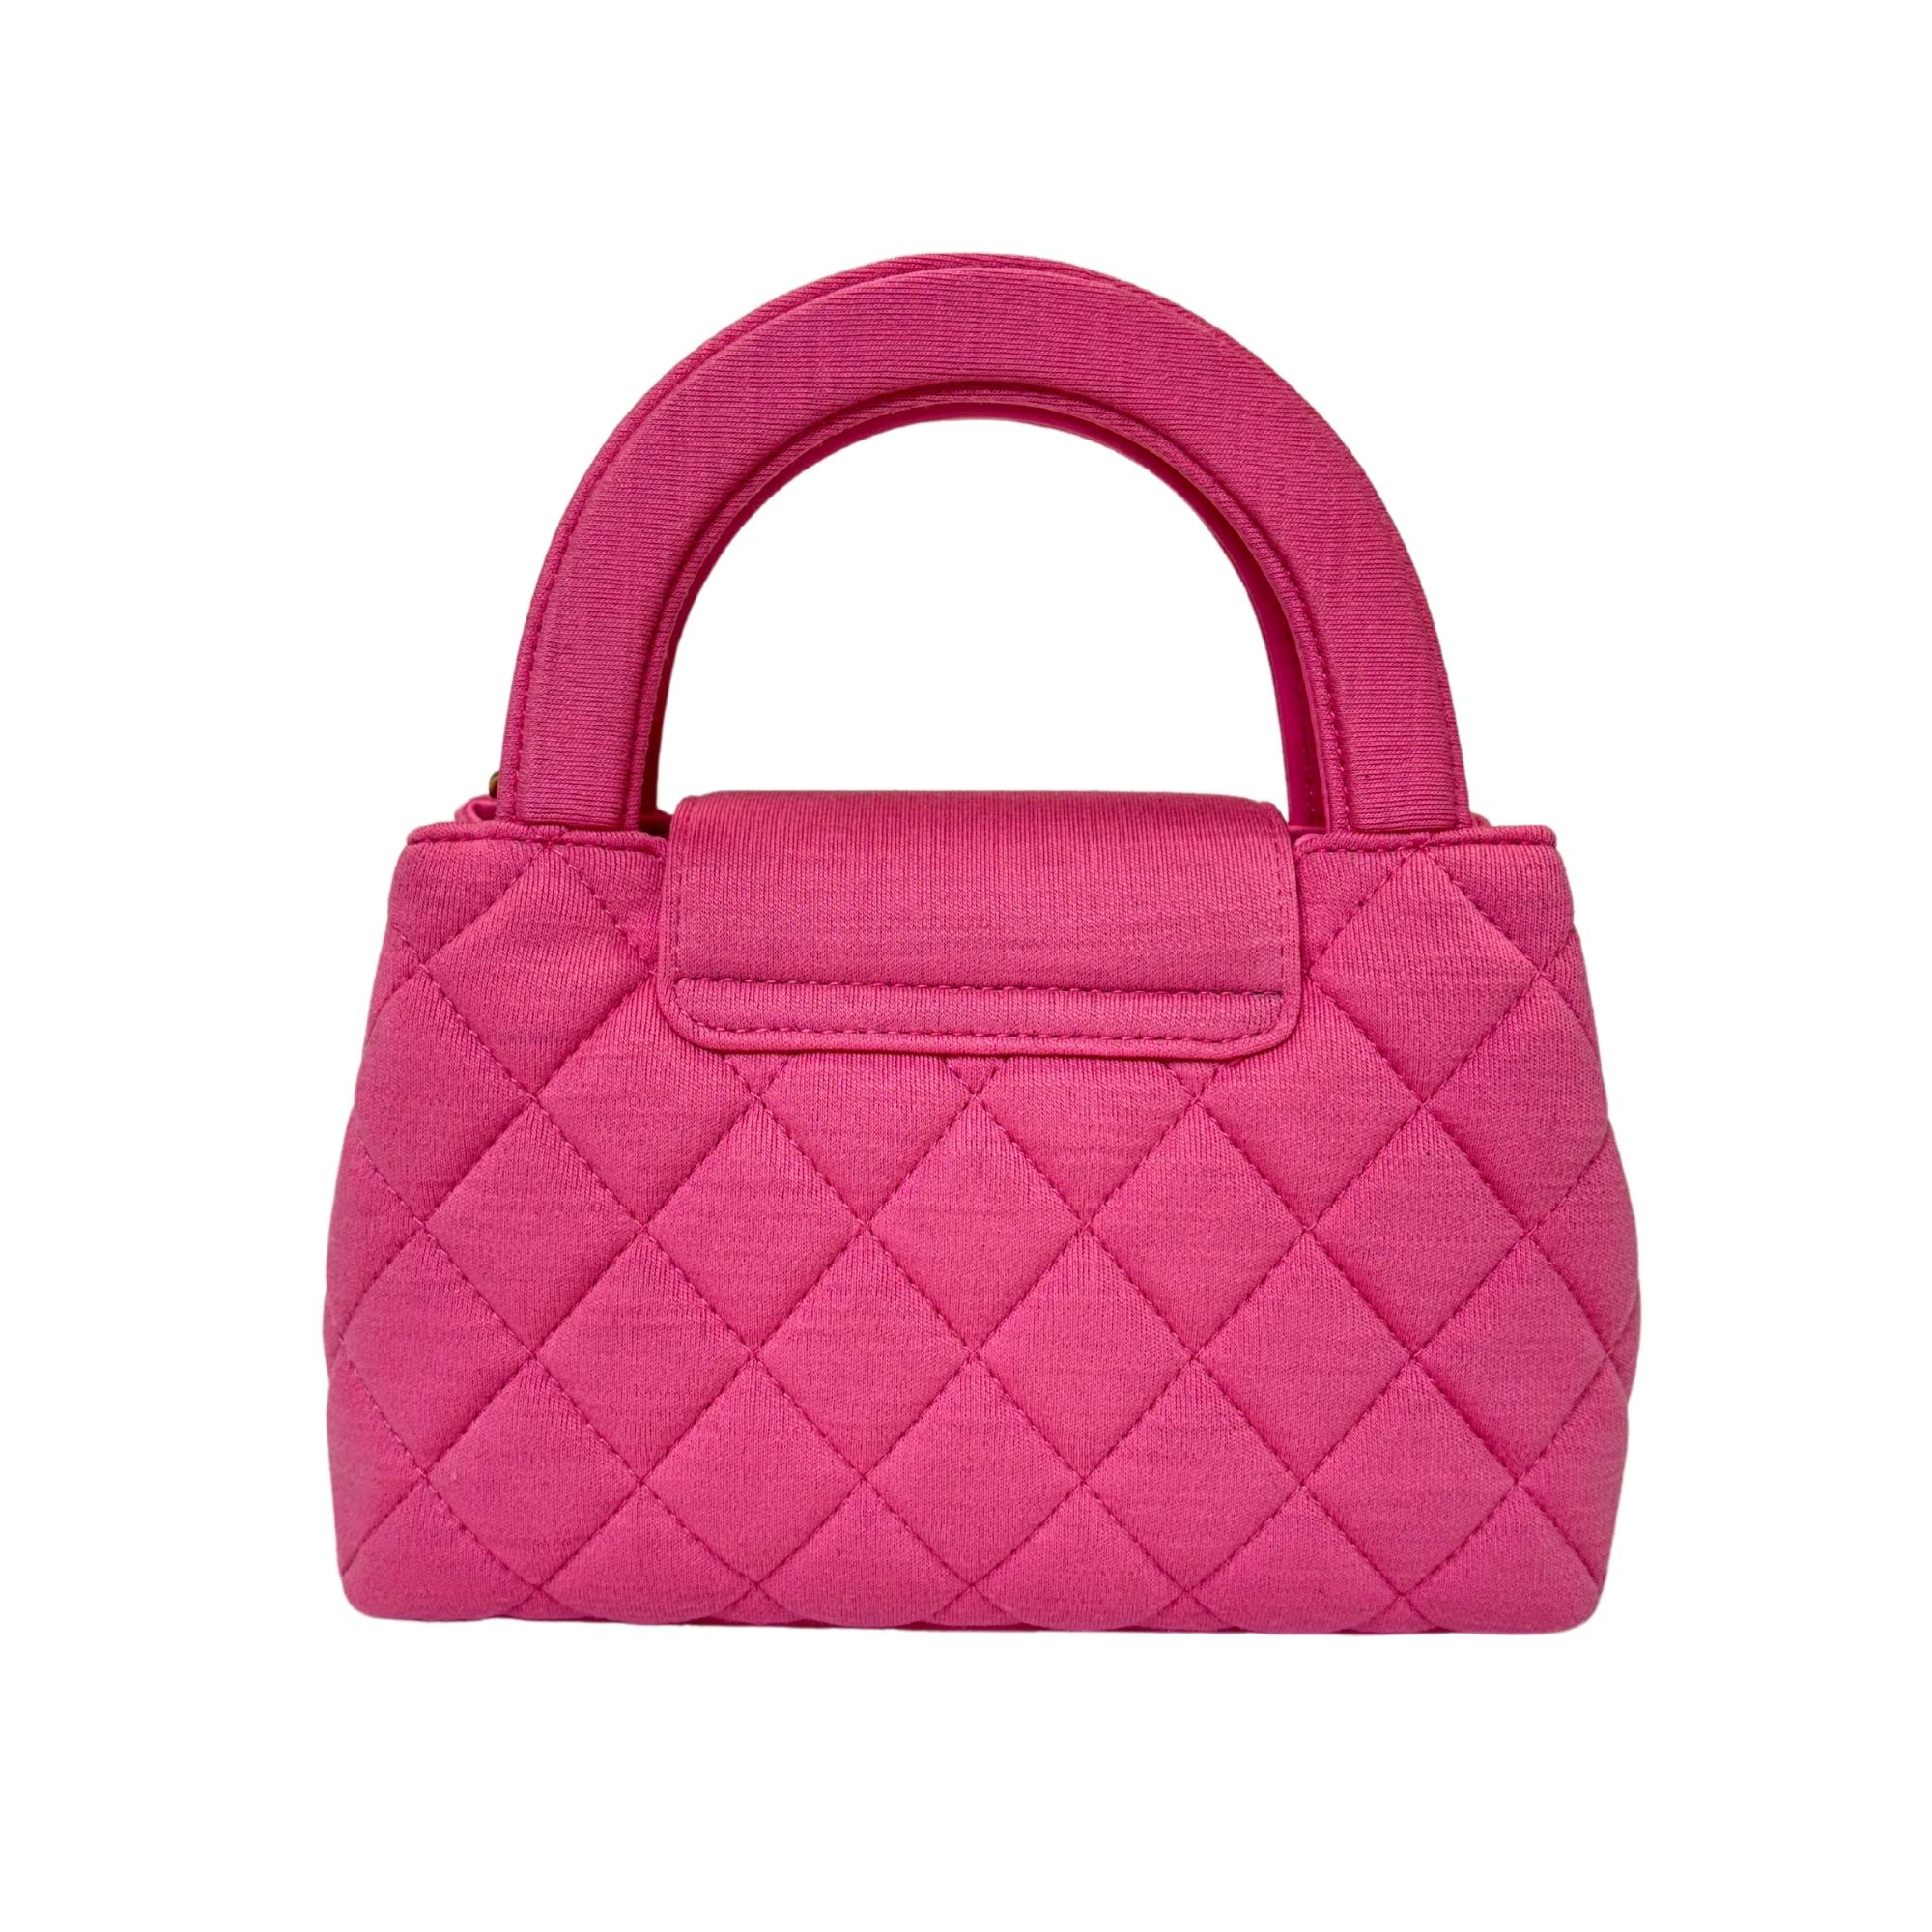 Introducing the Chanel Small Shopper Tote in dark pink, crafted from jersey fabric with a quilted stitch. Accentuated by aged gold hardware, including the signature CC turn-lock on the front flap, this bag exudes sophistication. Boasting dual top